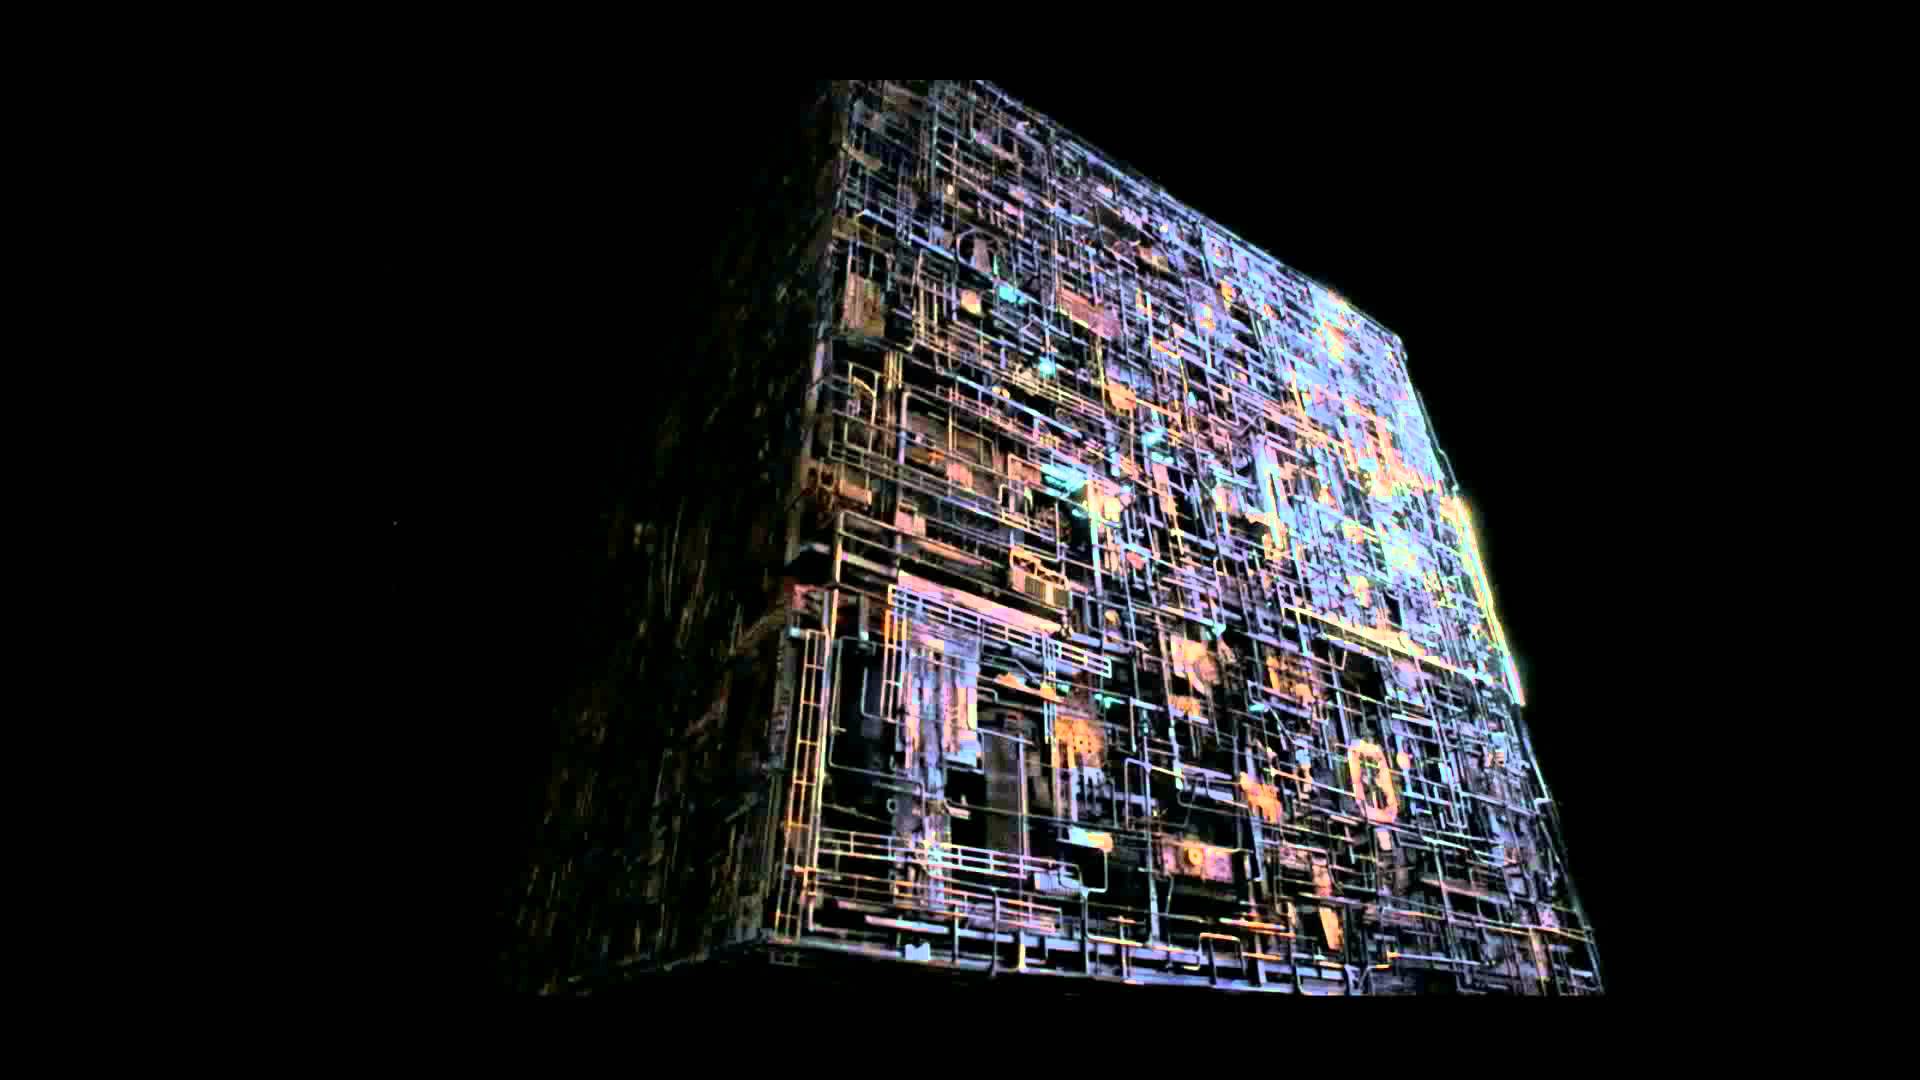 Borg Cube Ambient Engine Sound for 12 Hours